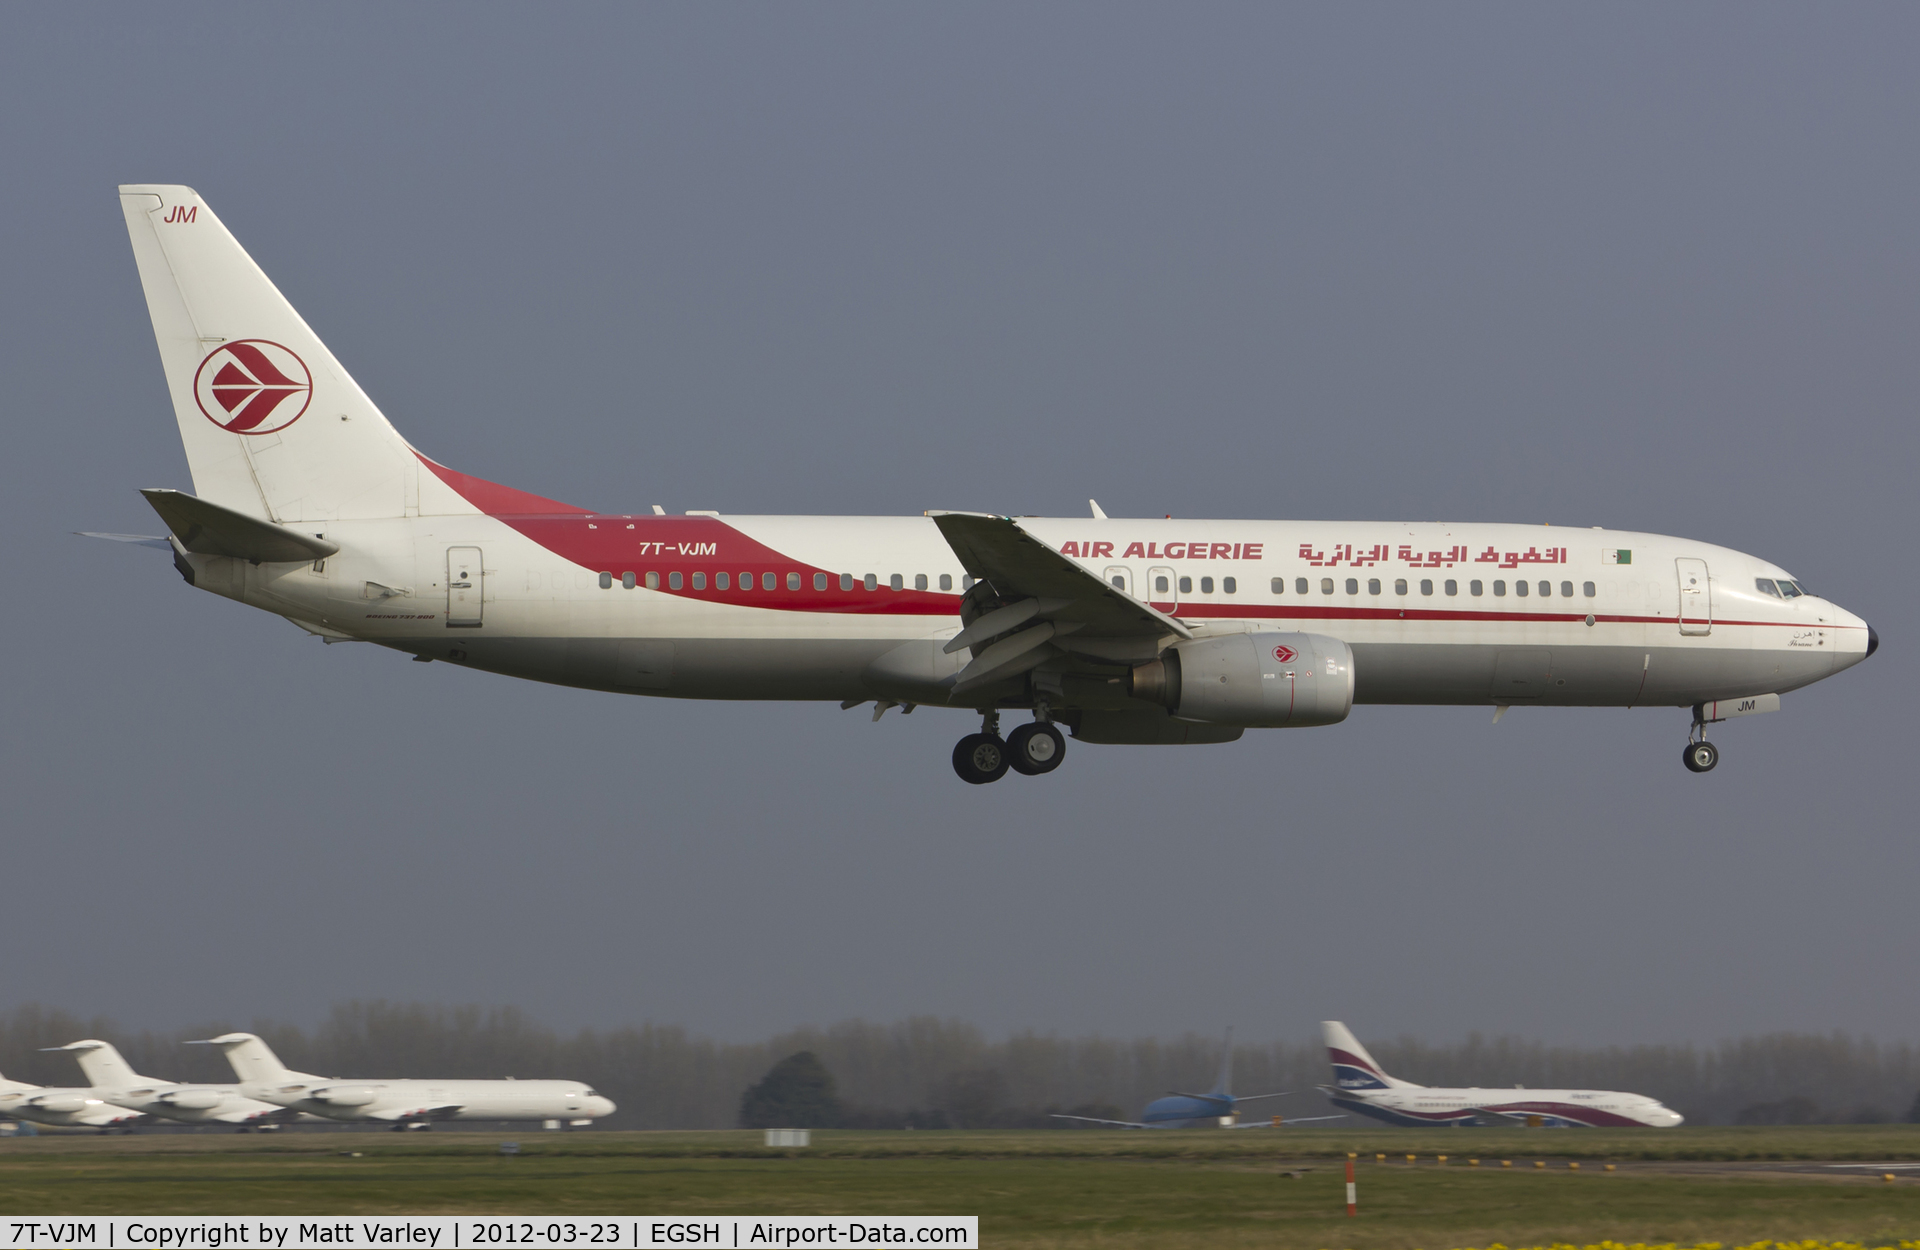 7T-VJM, 2000 Boeing 737-8D6 C/N 30205, Arriving at EGSH for spray by Air Livery.